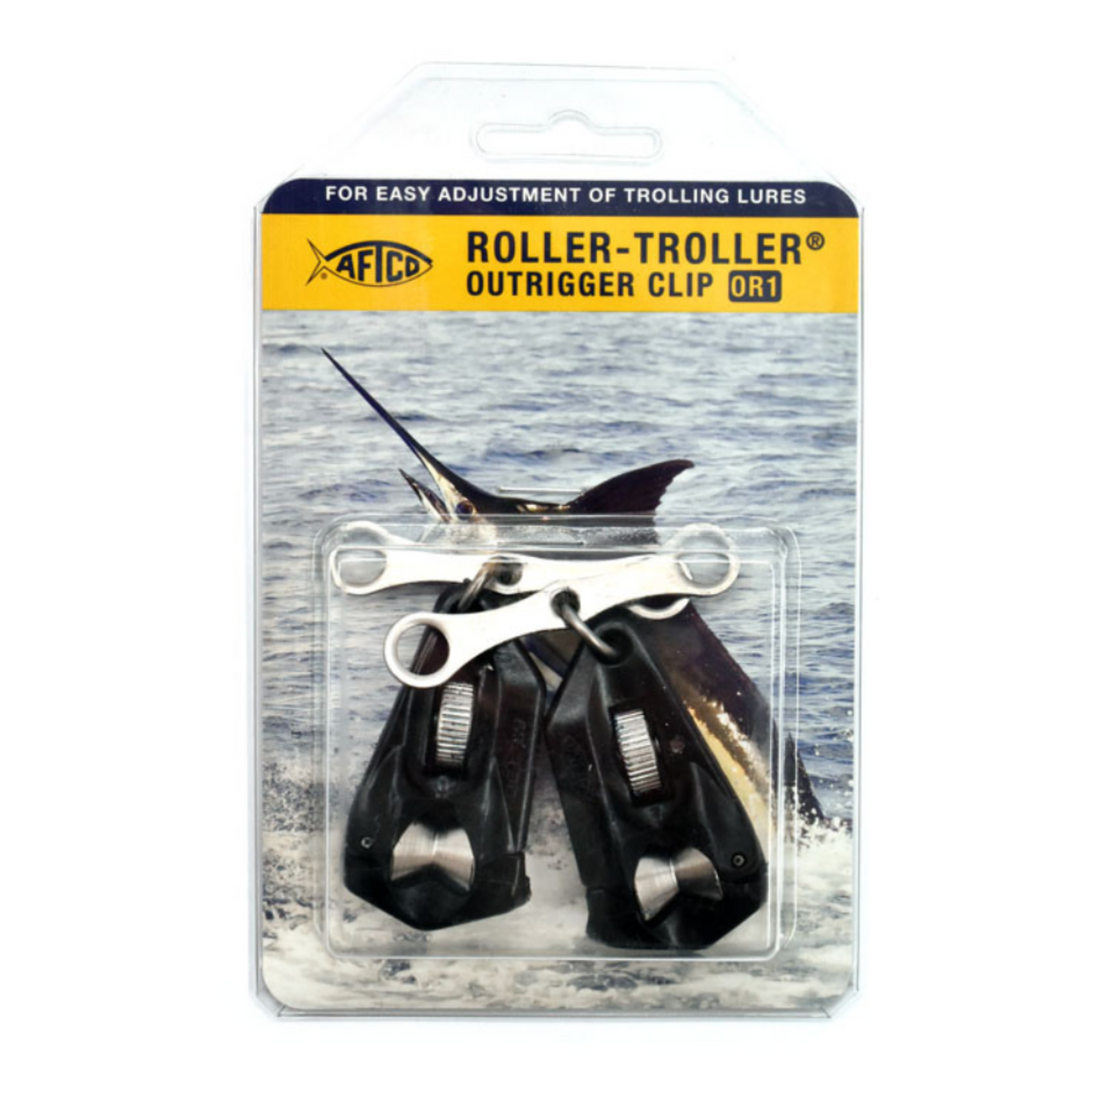 AFTCO CLIP ROLLER TROLLERS OR1 PACK 2